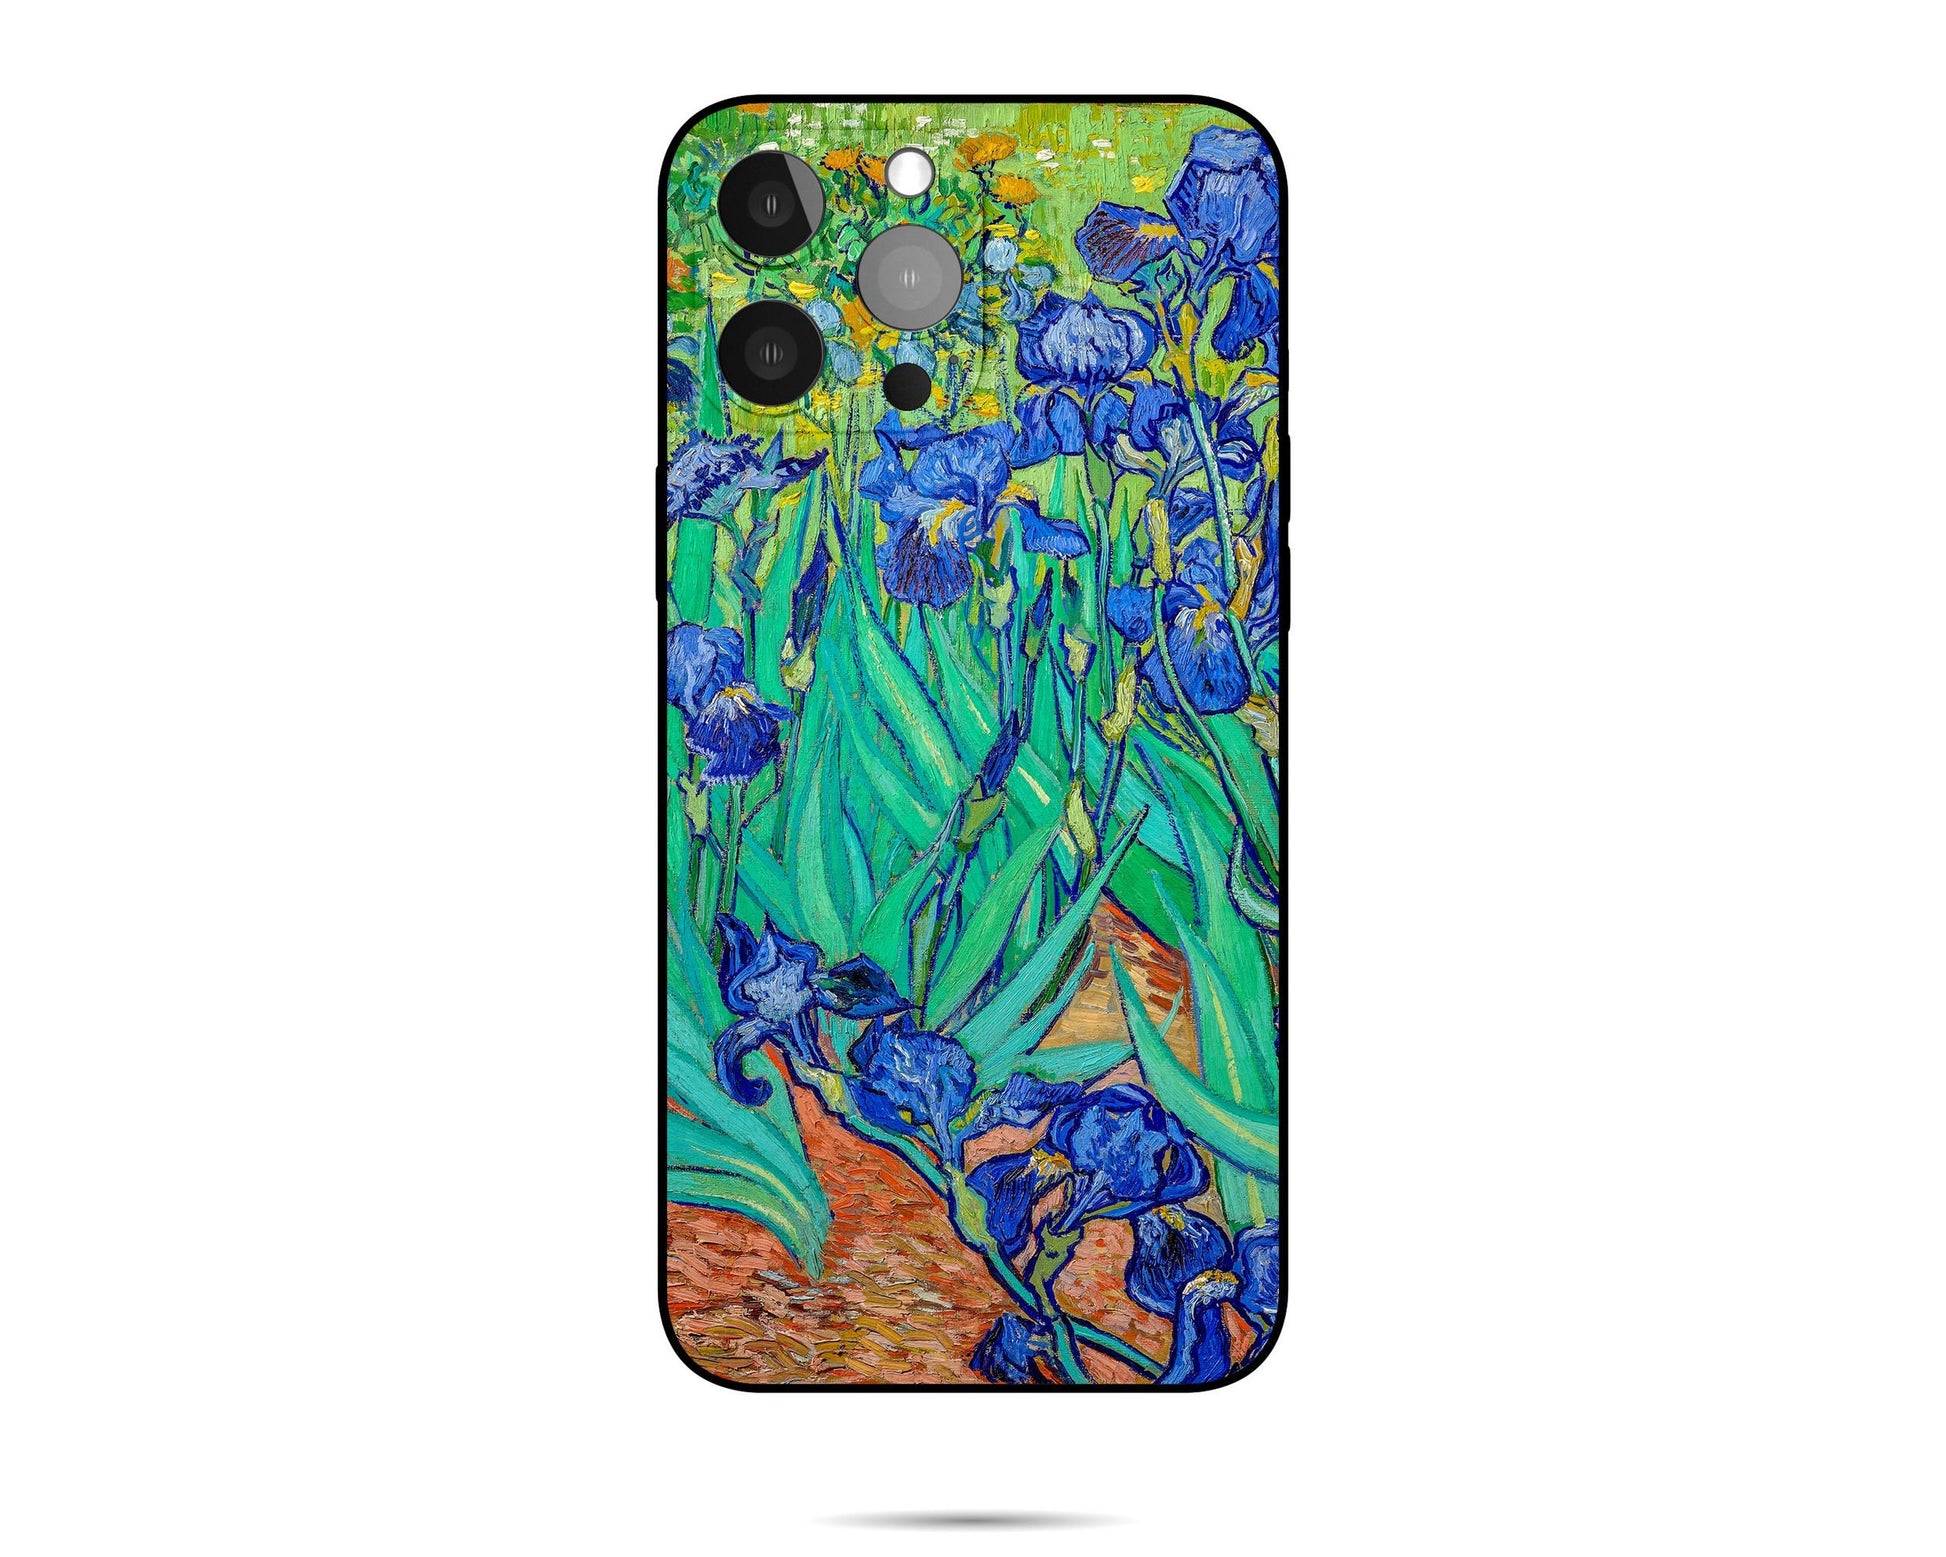 Vincent Van Gogh Irises Phone Cover, Iphone 14 Pro Max Case, Iphone 7 Plus, Iphone 8 Plus Case Art, Birthday Gift, Iphone Case Silicone